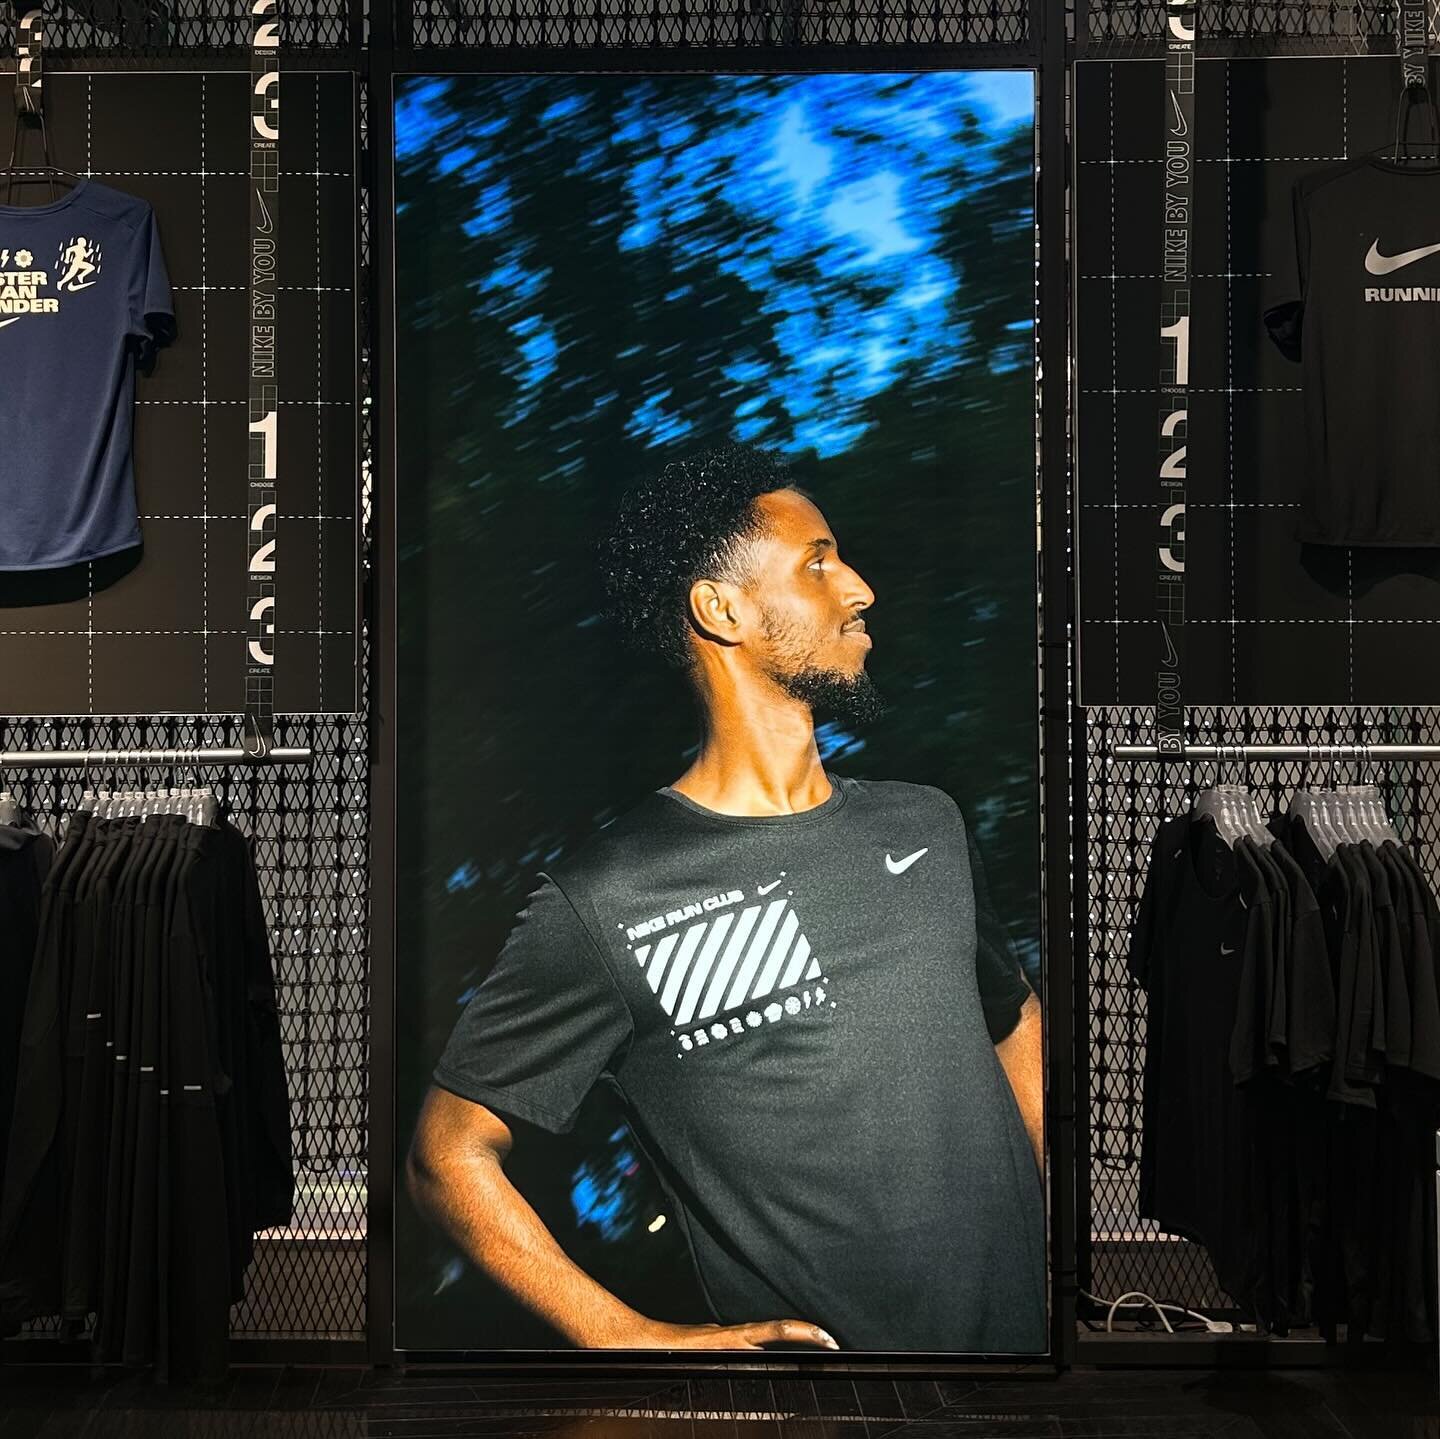 Always love seeing my images printed, especially when they&rsquo;re in NikeTown London! 

Nike Running campaign shot last year for the launch of the reflective, custom patches 🏃

Thanks to @mialenthall for helping out in this one as always!